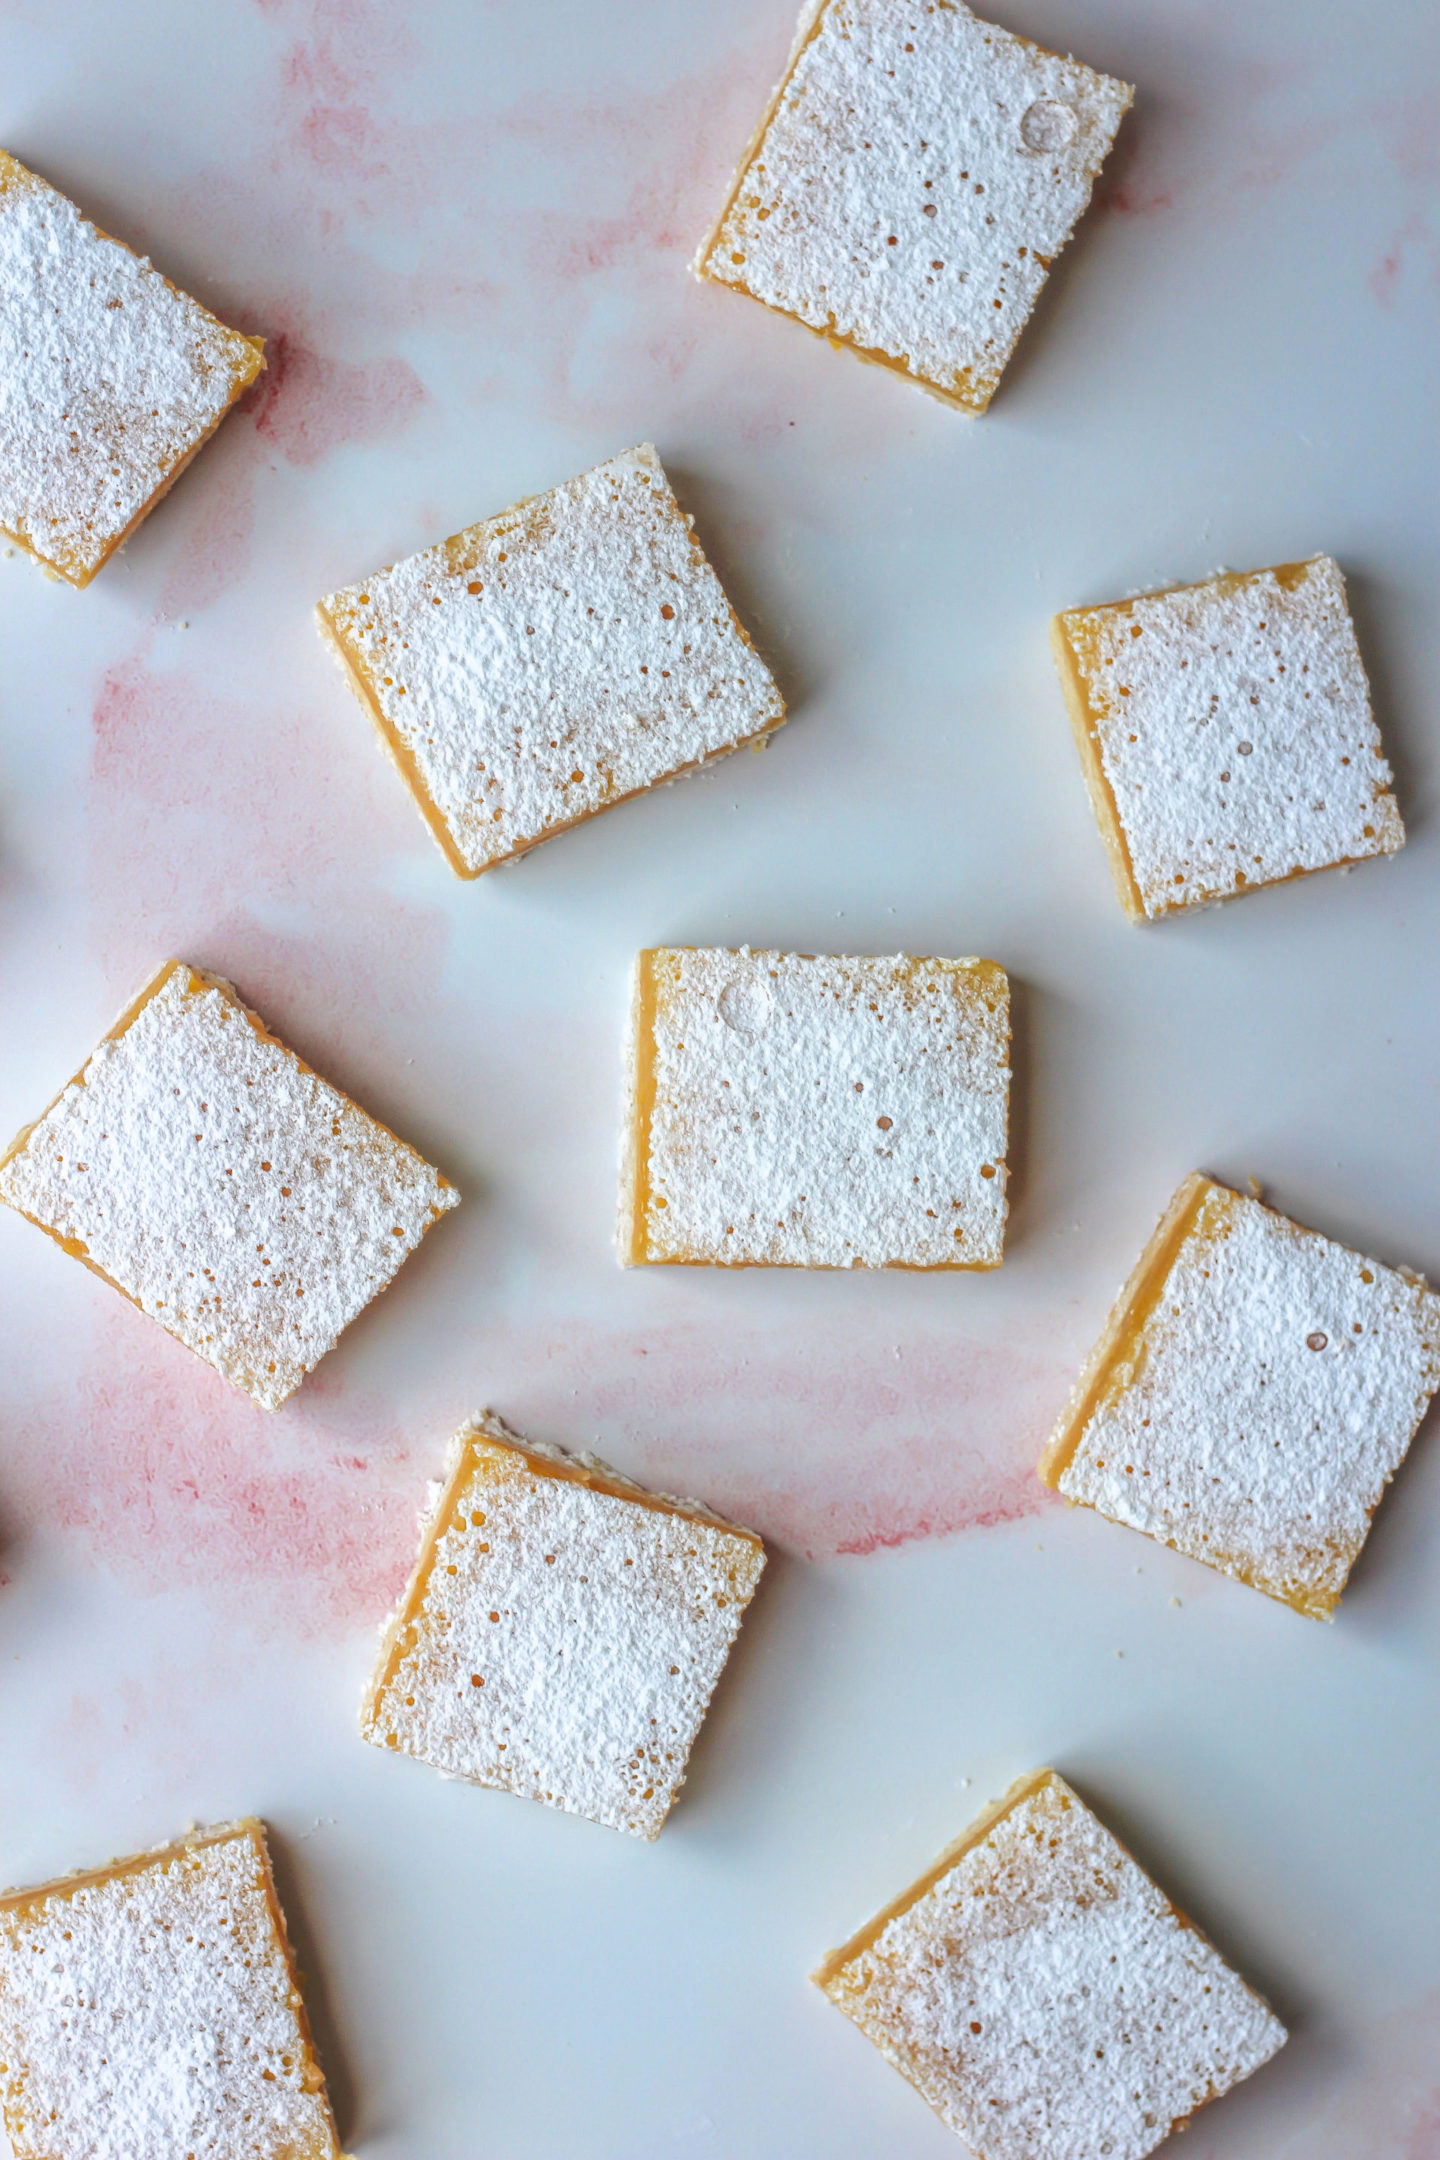 view from above of several lemon bars on countertop